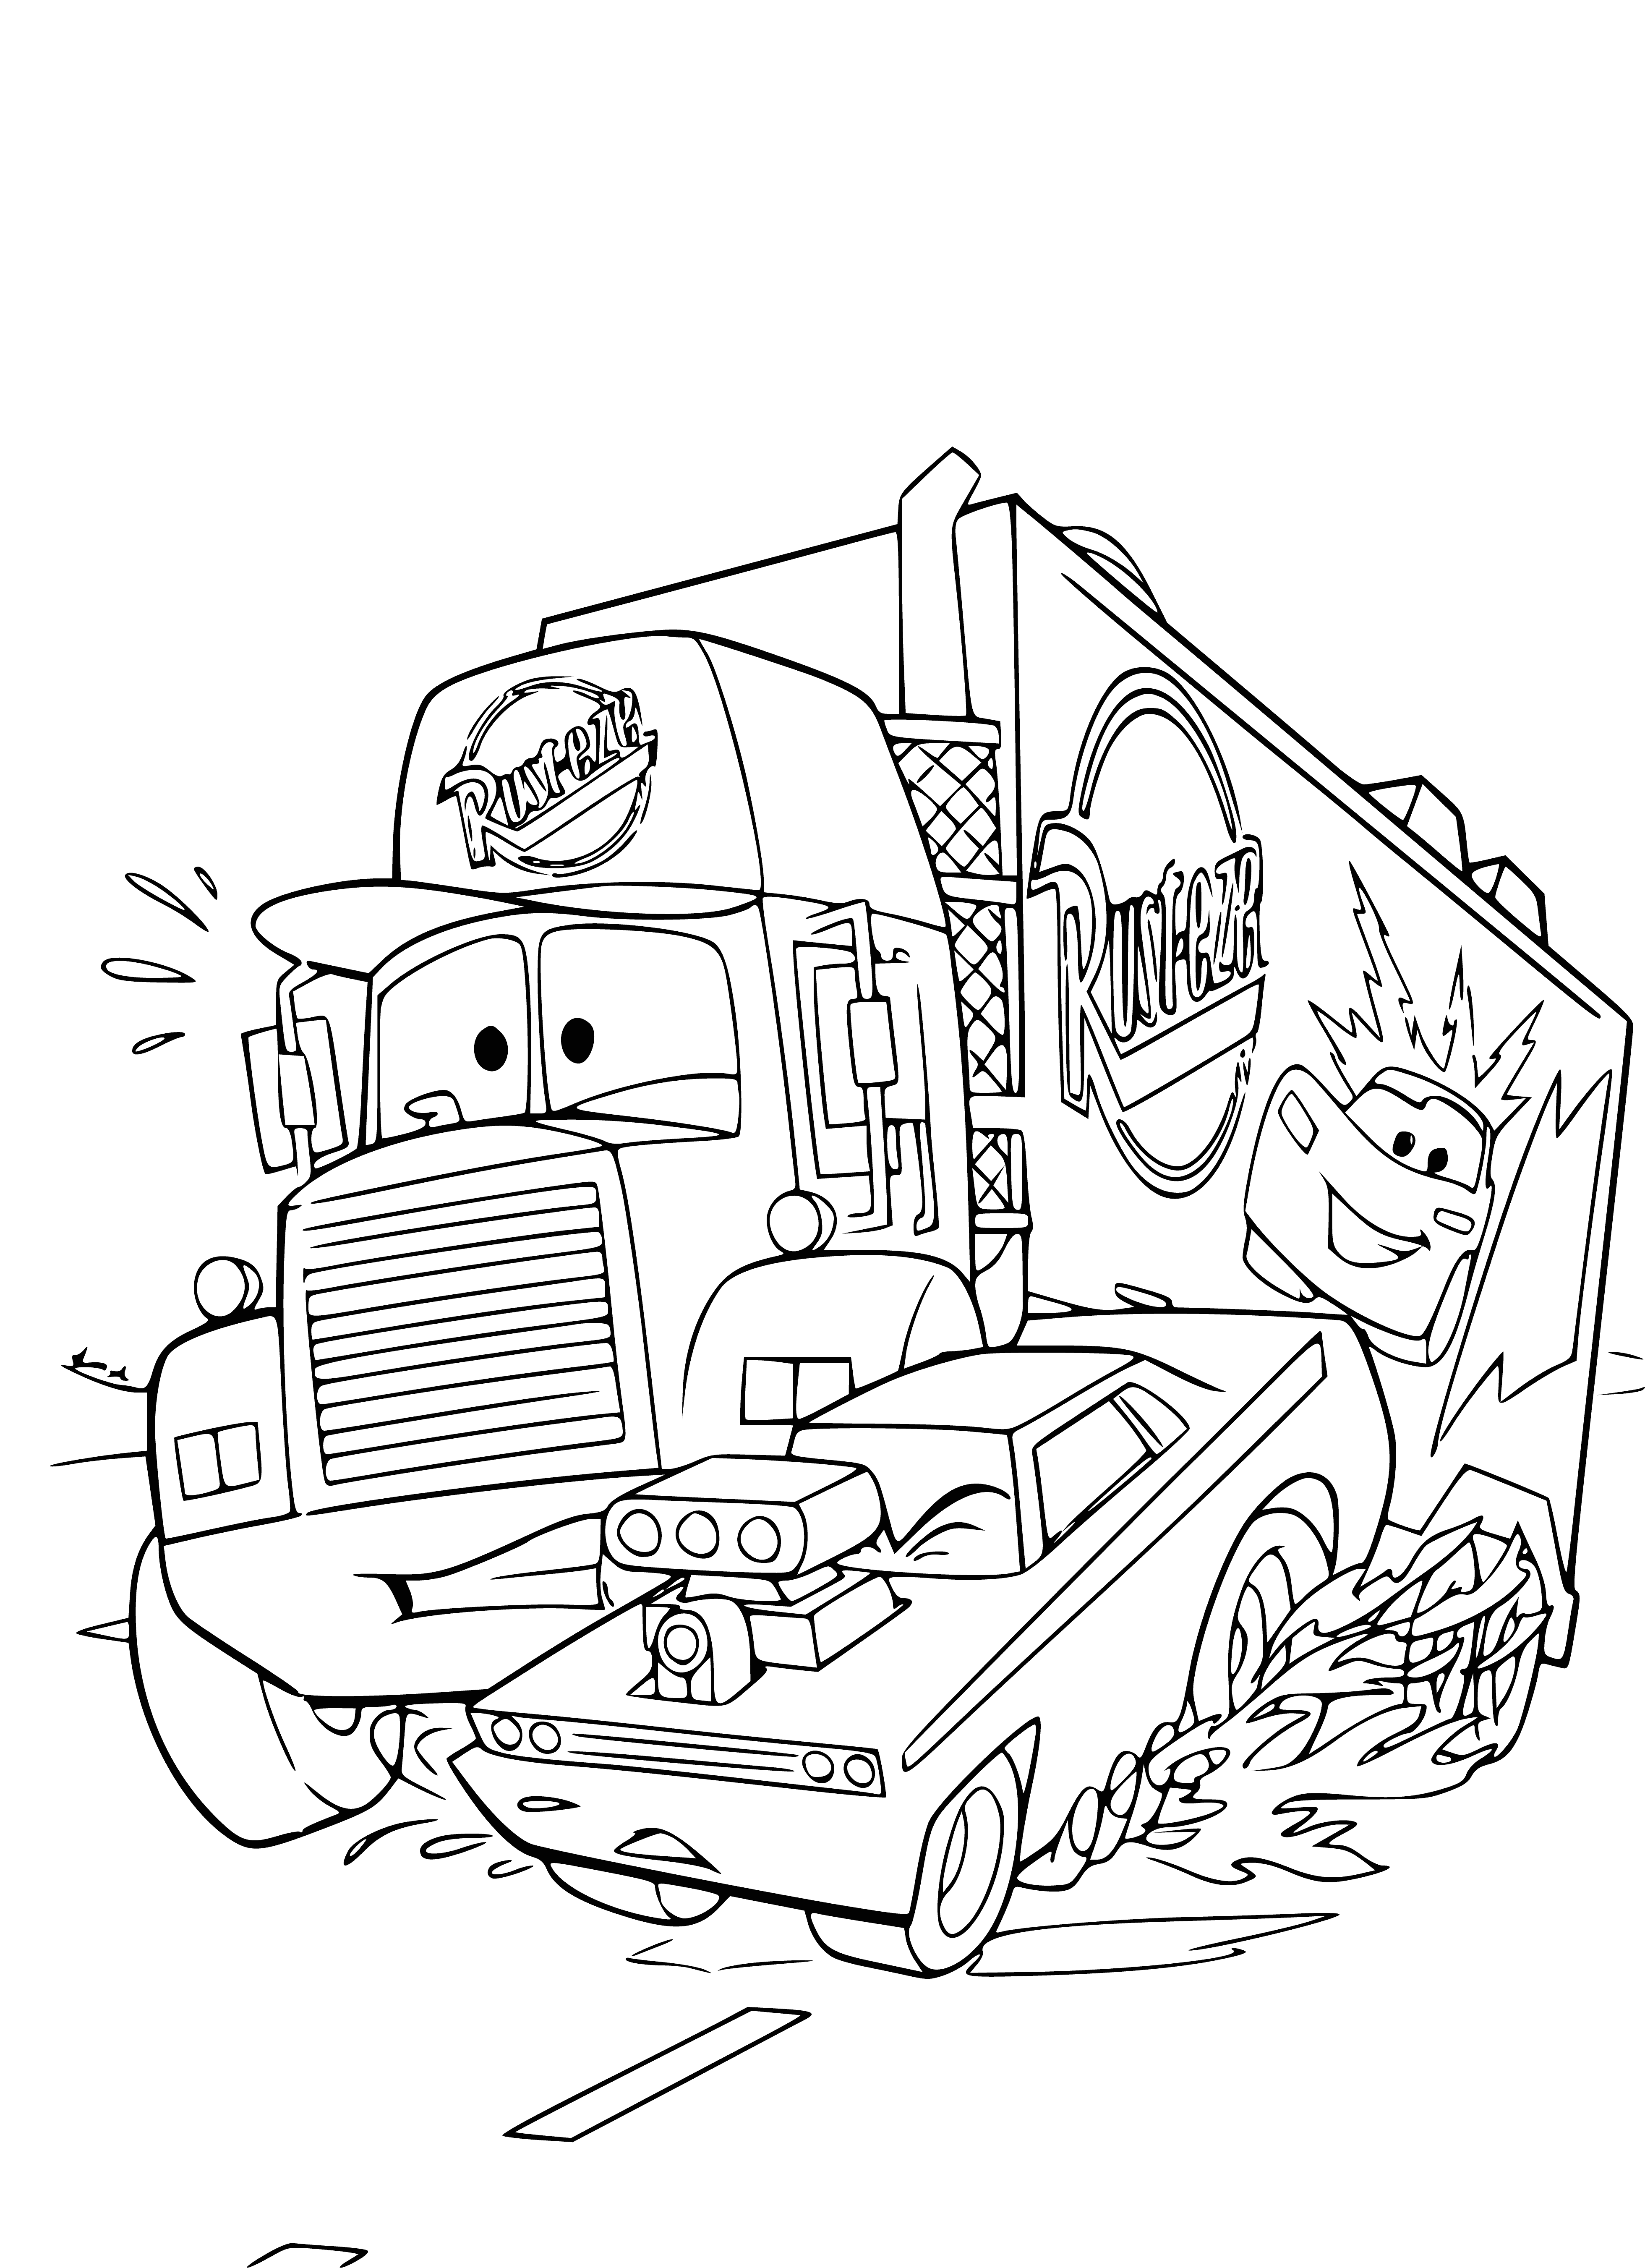 Hooligans on the road coloring page